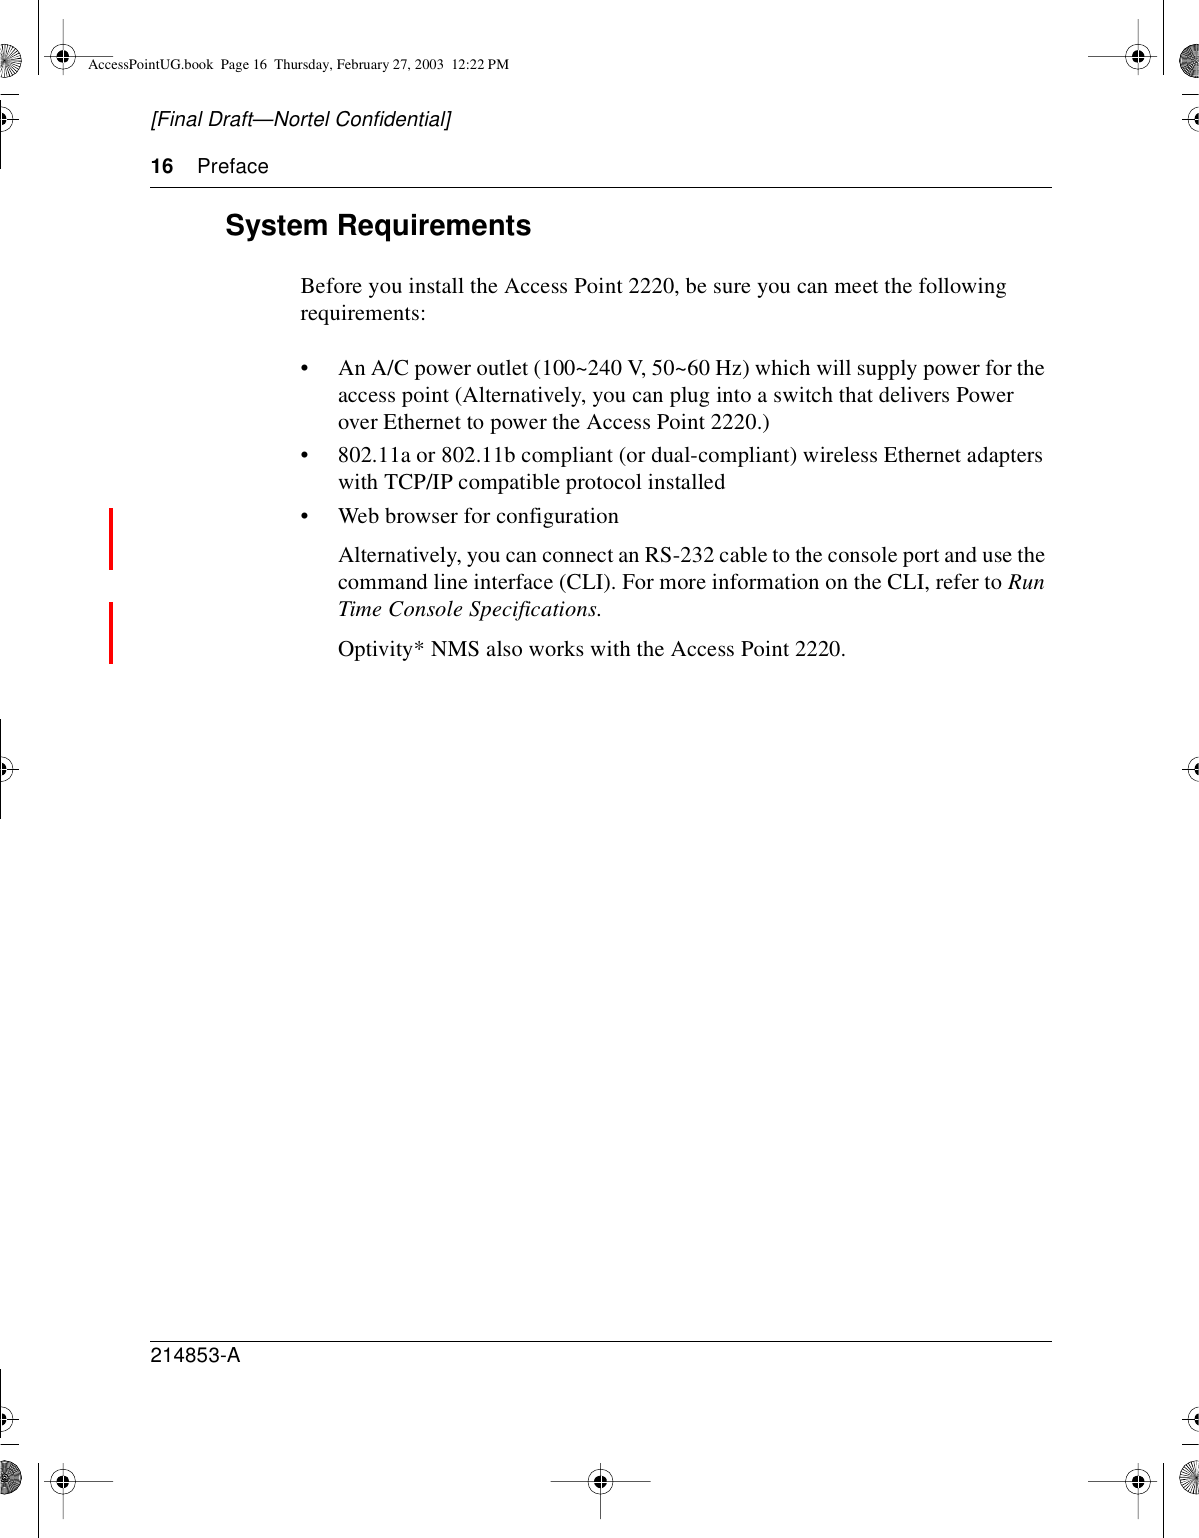 16 Preface214853-A[Final Draft—Nortel Confidential]System RequirementsBefore you install the Access Point 2220, be sure you can meet the followingrequirements:• An A/C power outlet (100~240 V, 50~60 Hz) which will supply power for theaccess point (Alternatively, you can plug into a switch that delivers Powerover Ethernet to power the Access Point 2220.)• 802.11a or 802.11b compliant (or dual-compliant) wireless Ethernet adapterswith TCP/IP compatible protocol installed• Web browser for configurationAlternatively, you can connect an RS-232 cable to the console port and use thecommand line interface (CLI). For more information on the CLI, refer to RunTime Console Specifications.Optivity* NMS also works with the Access Point 2220.AccessPointUG.book Page 16 Thursday, February 27, 2003 12:22 PM